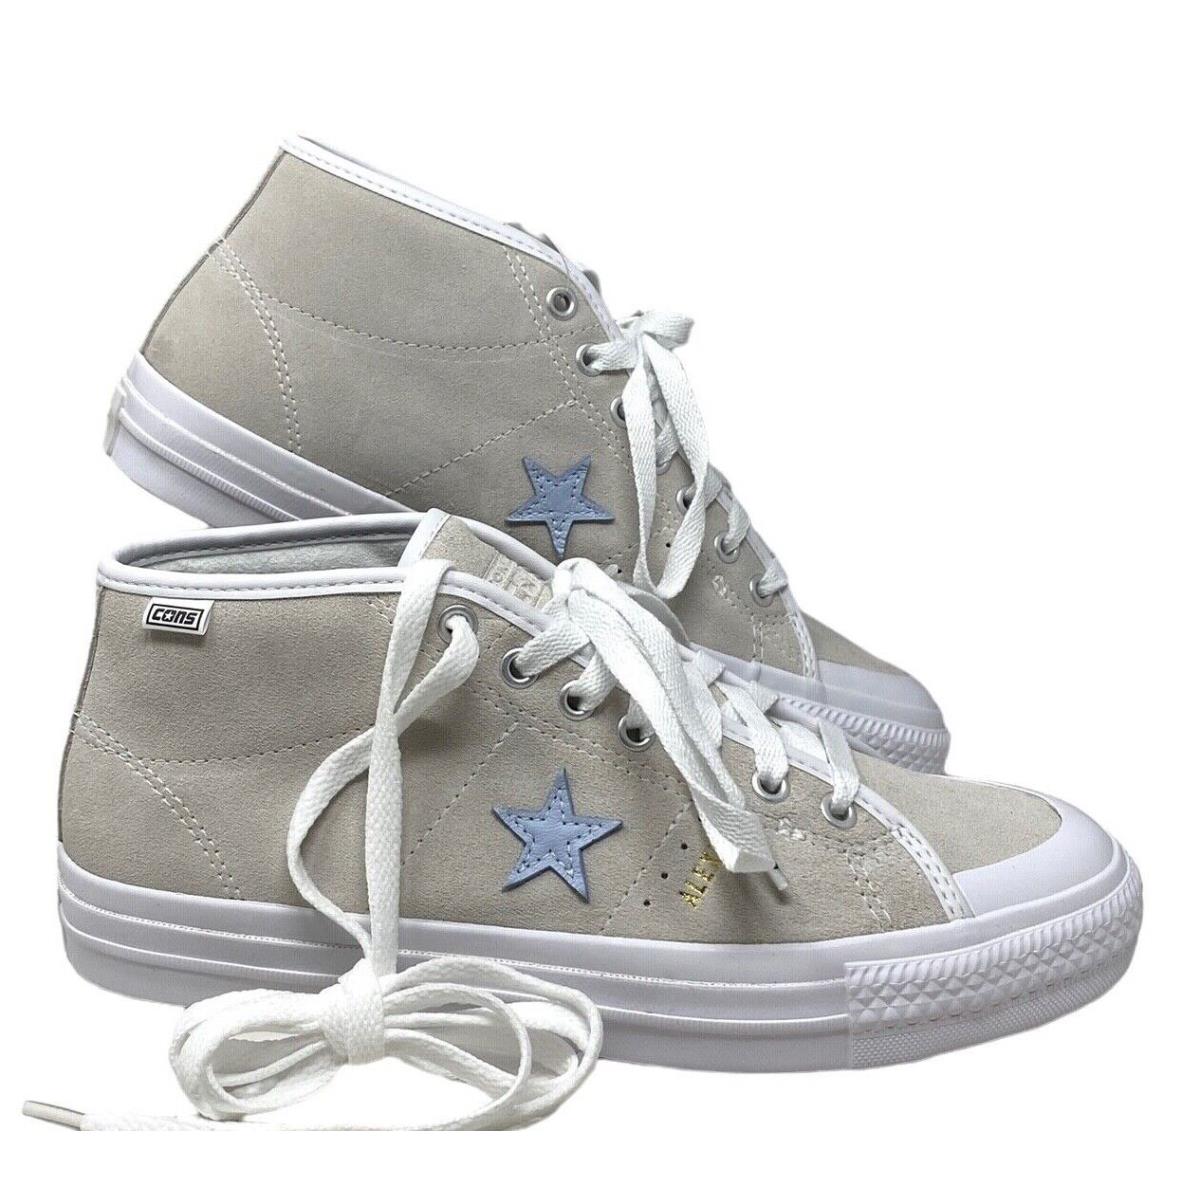 Converse x Alexis Sablone One Star Cons Pro Mid Shoes Suede White Women 171326C